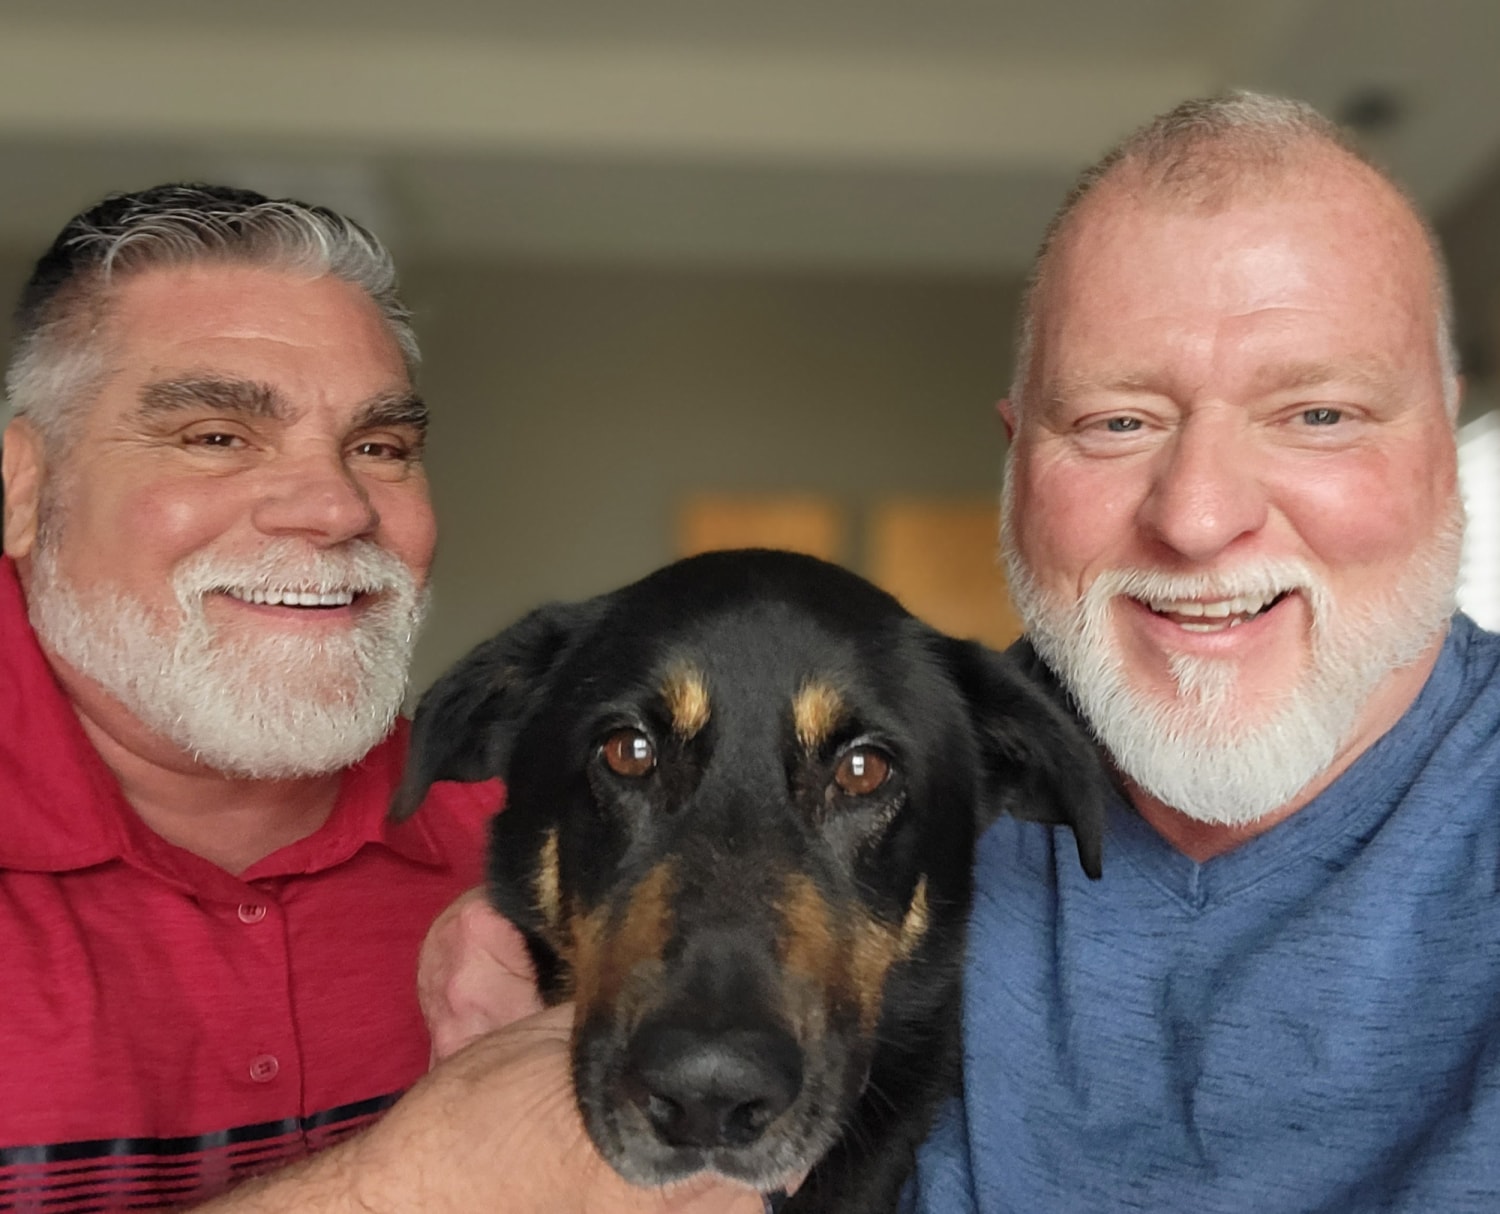 Dog abandoned for being 'gay' is adopted by same-sex couple